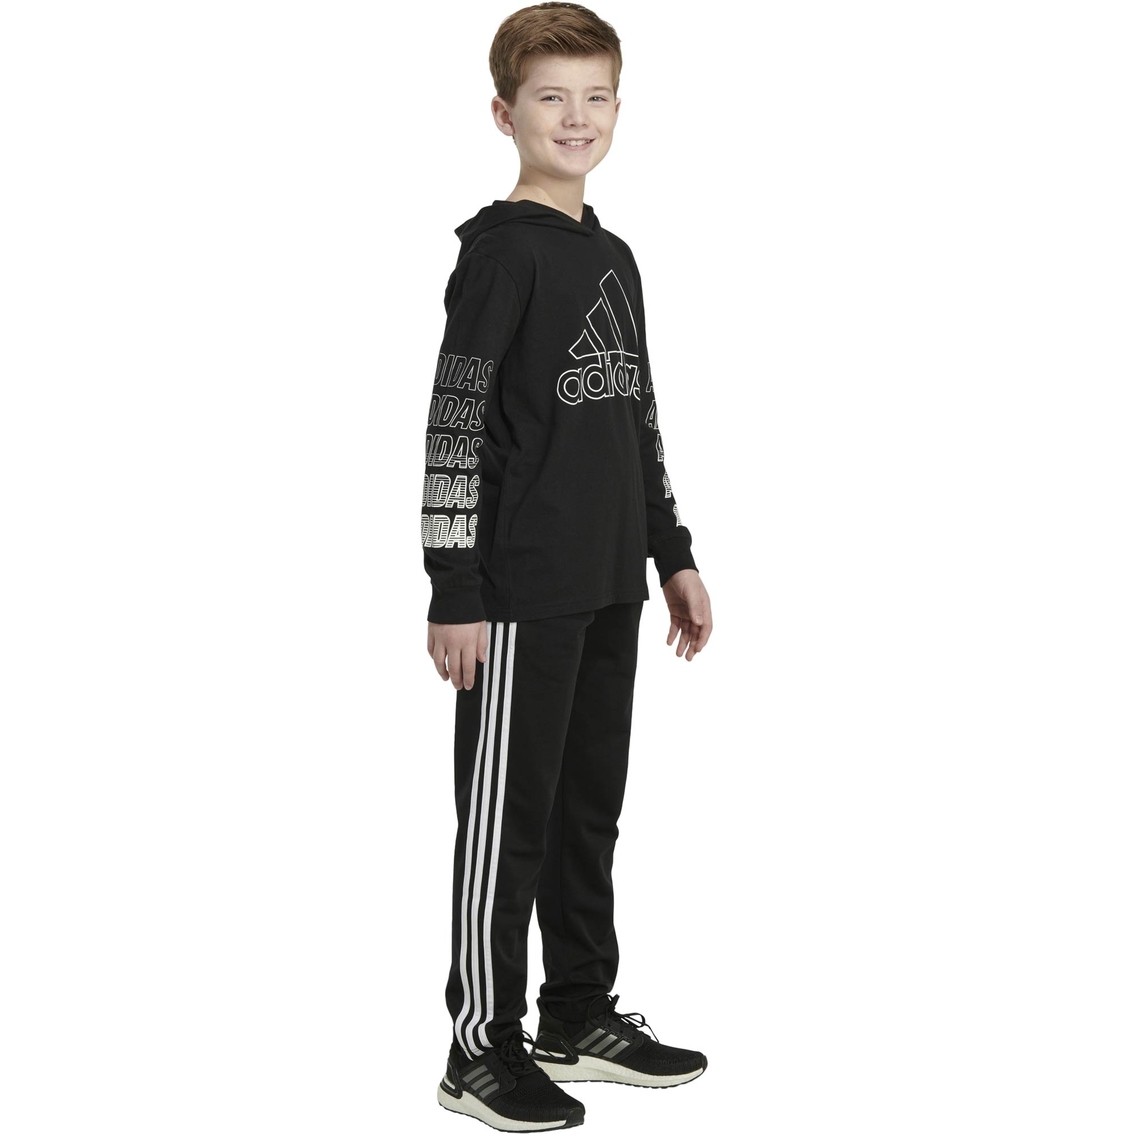 Adidas Toddler Boys Fast Hooded Tee - Image 3 of 7